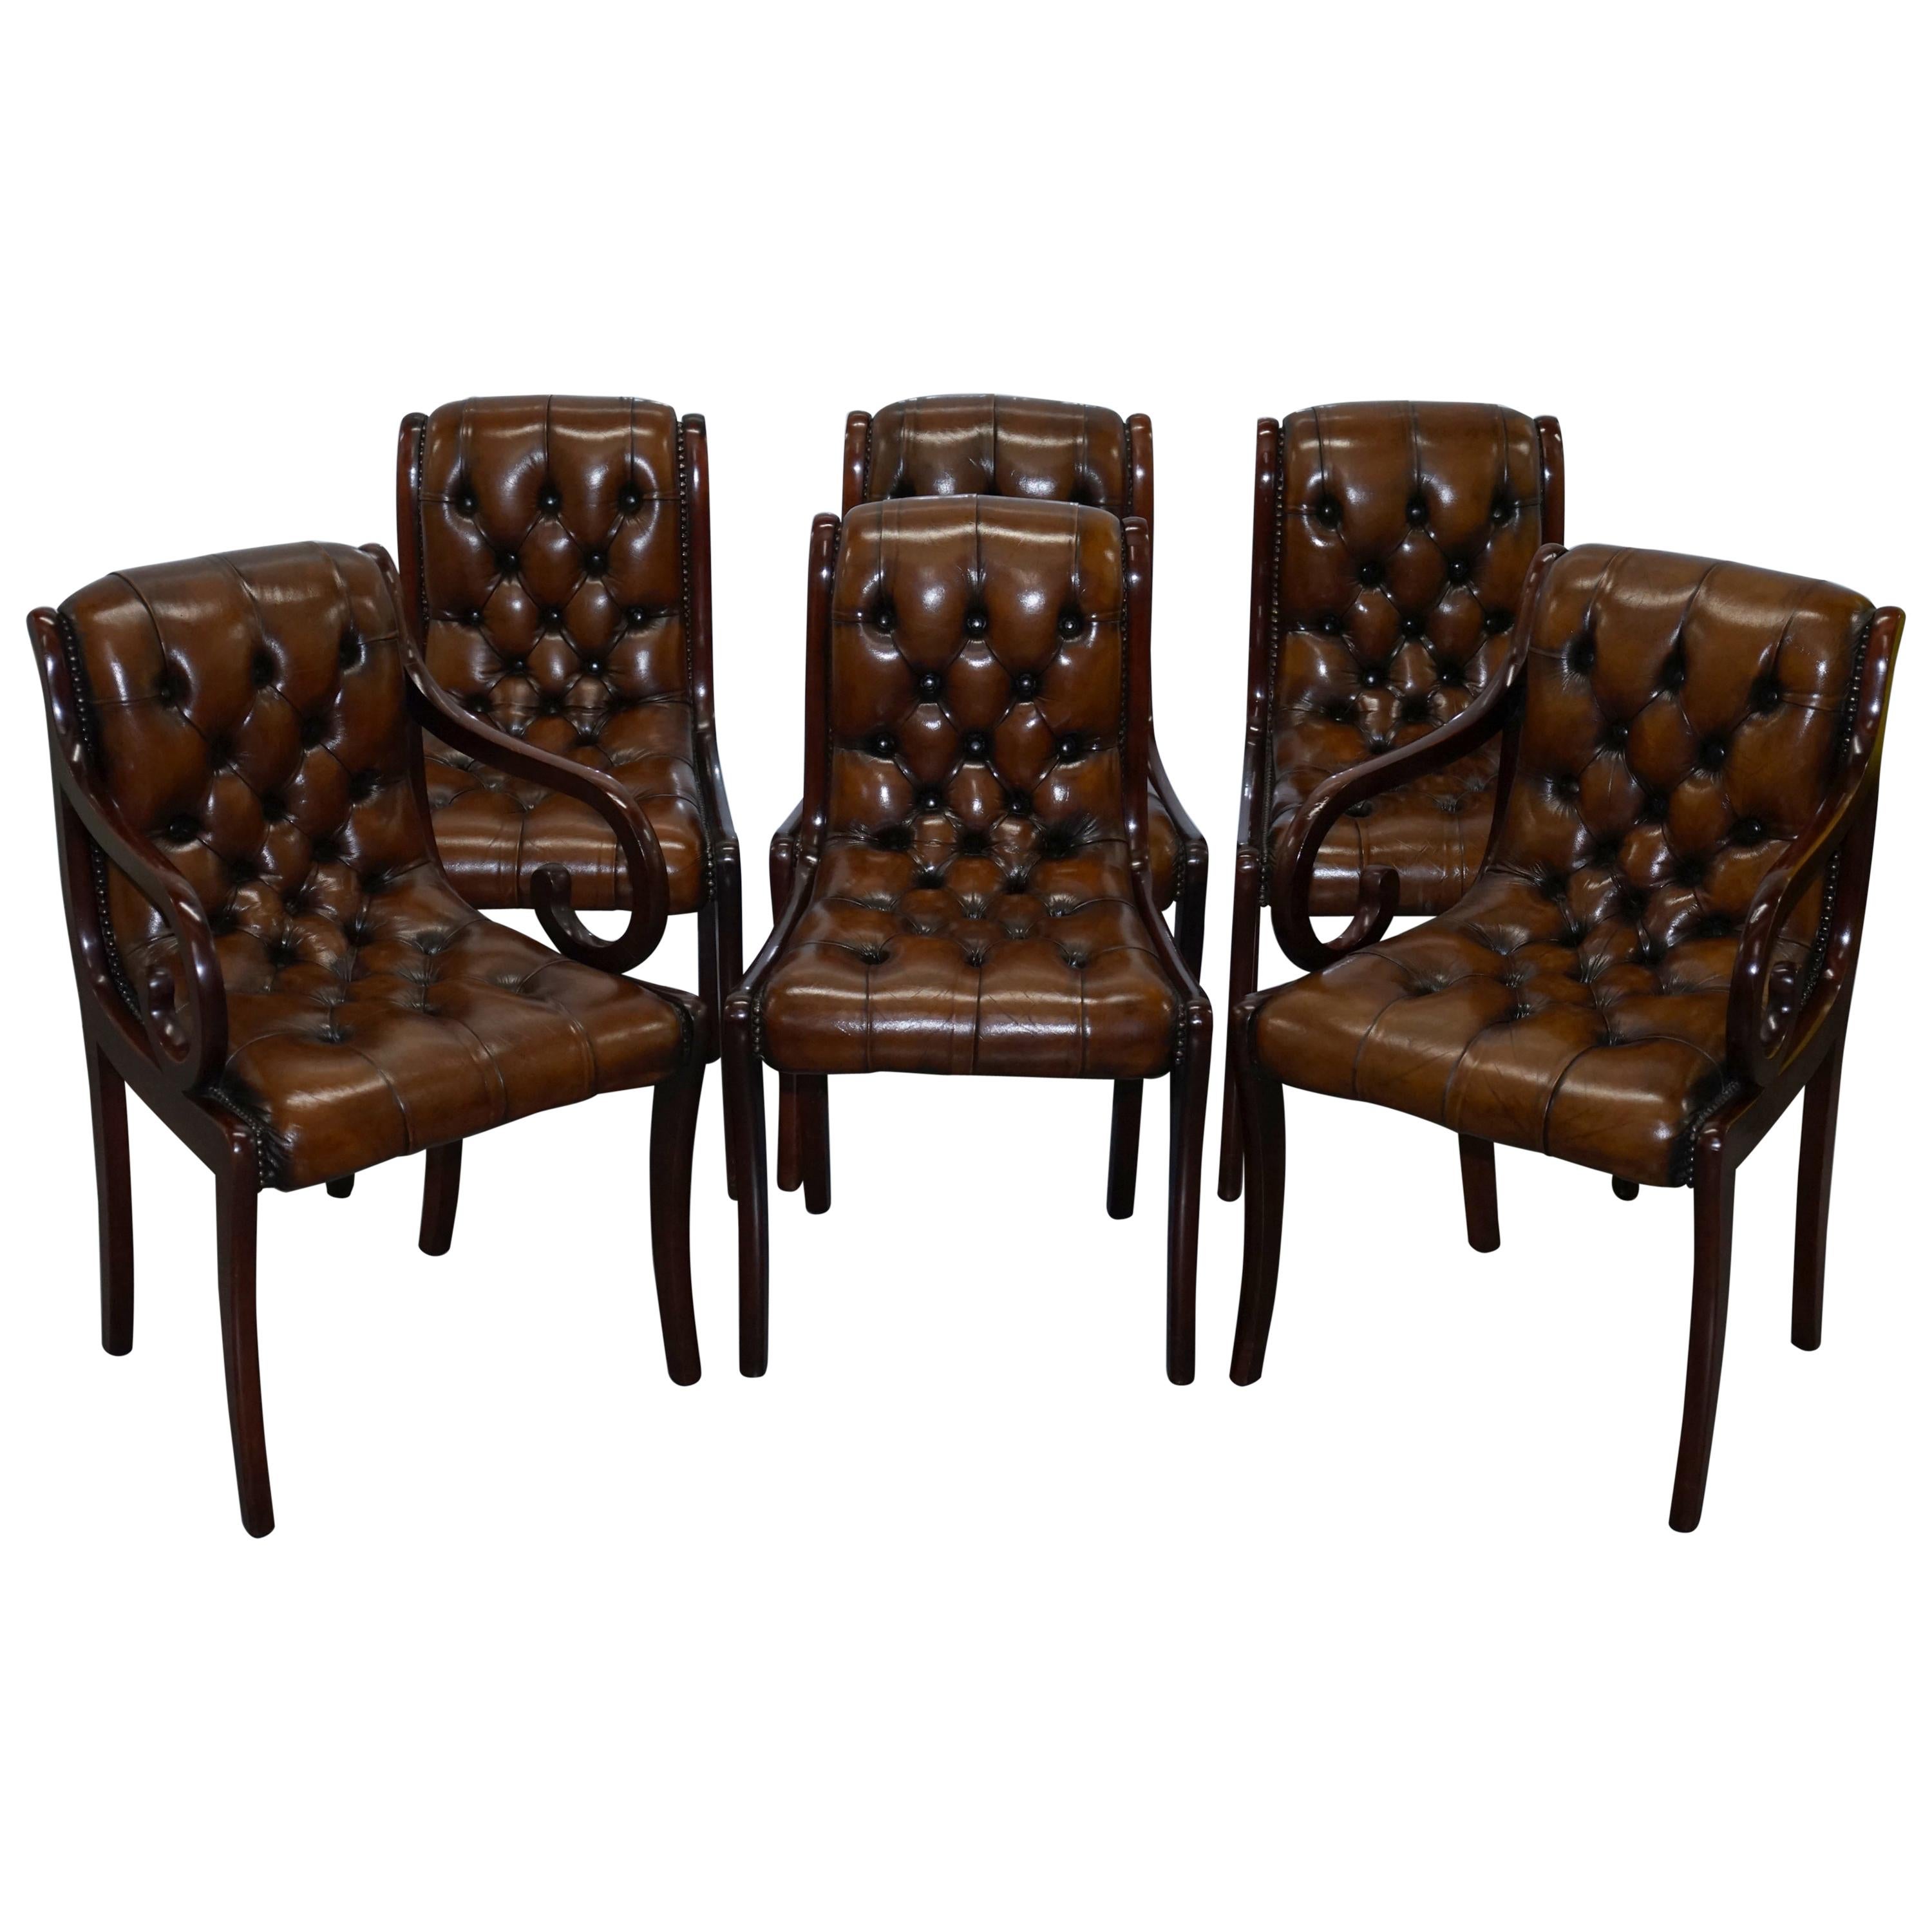 Set of 6 Fully Restored Chesterfield Dining Chairs Whisky Brown Leather Ten Set